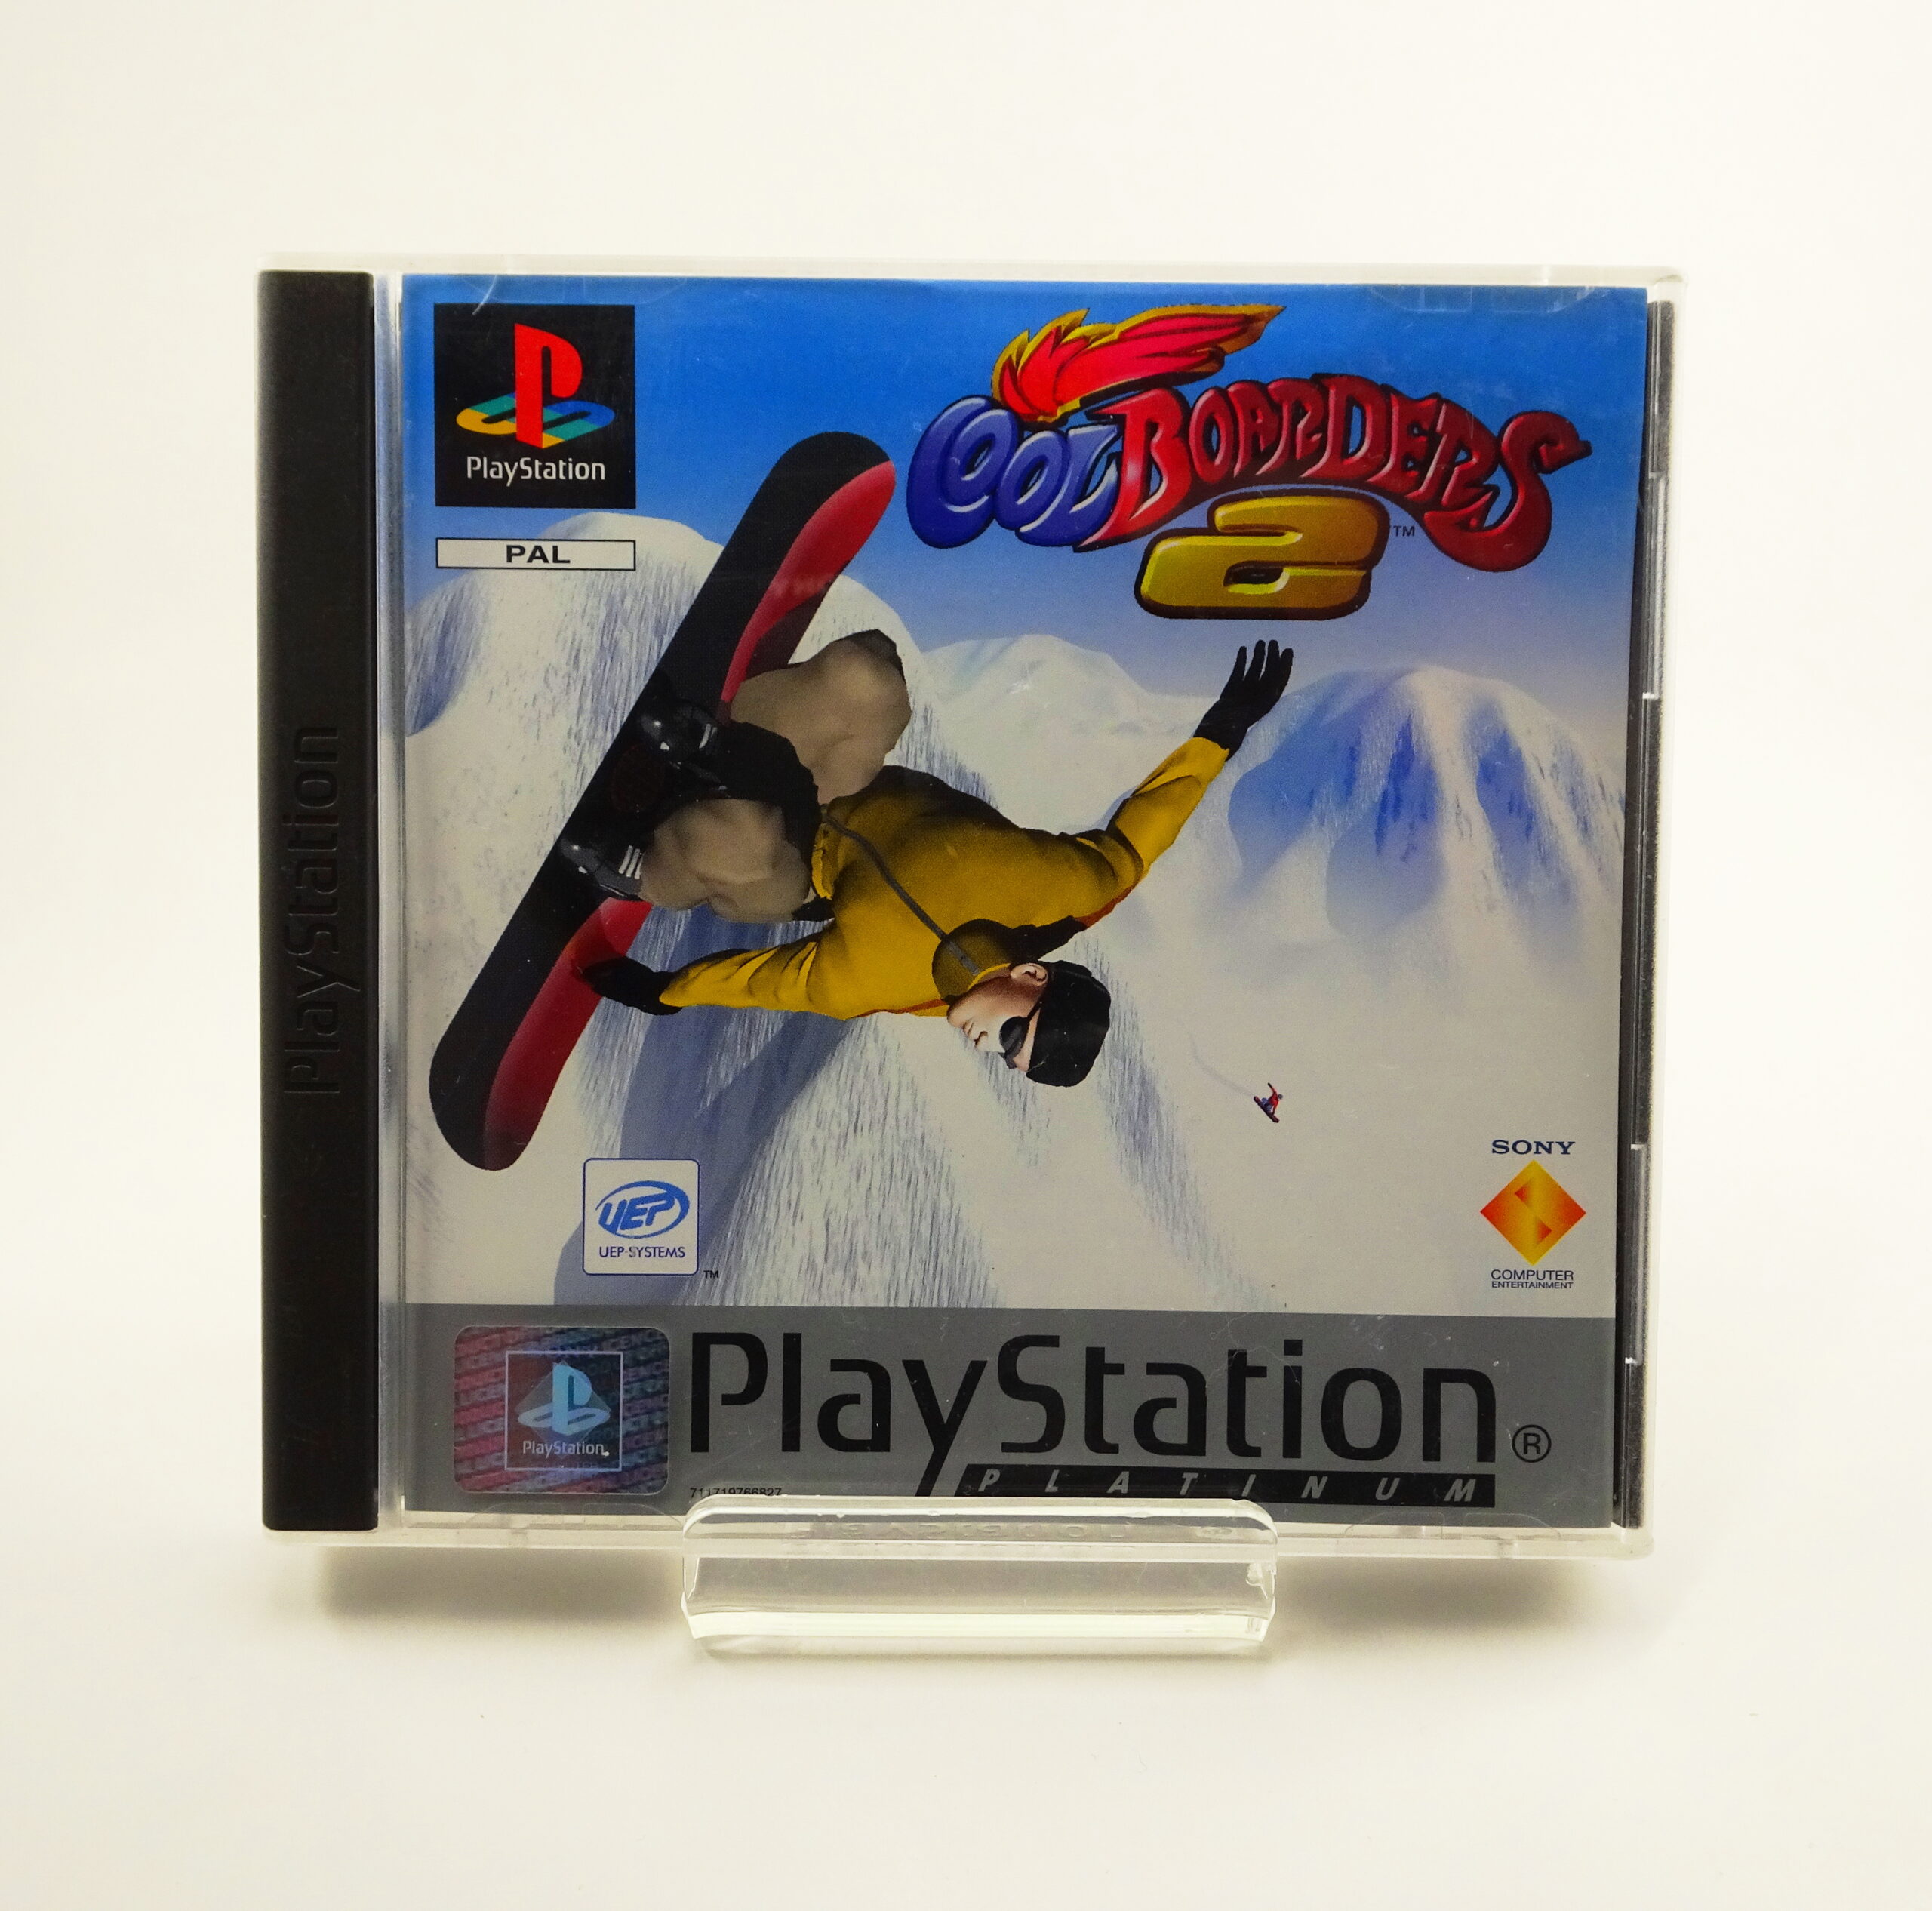 Cool boarders 2 (PS1)